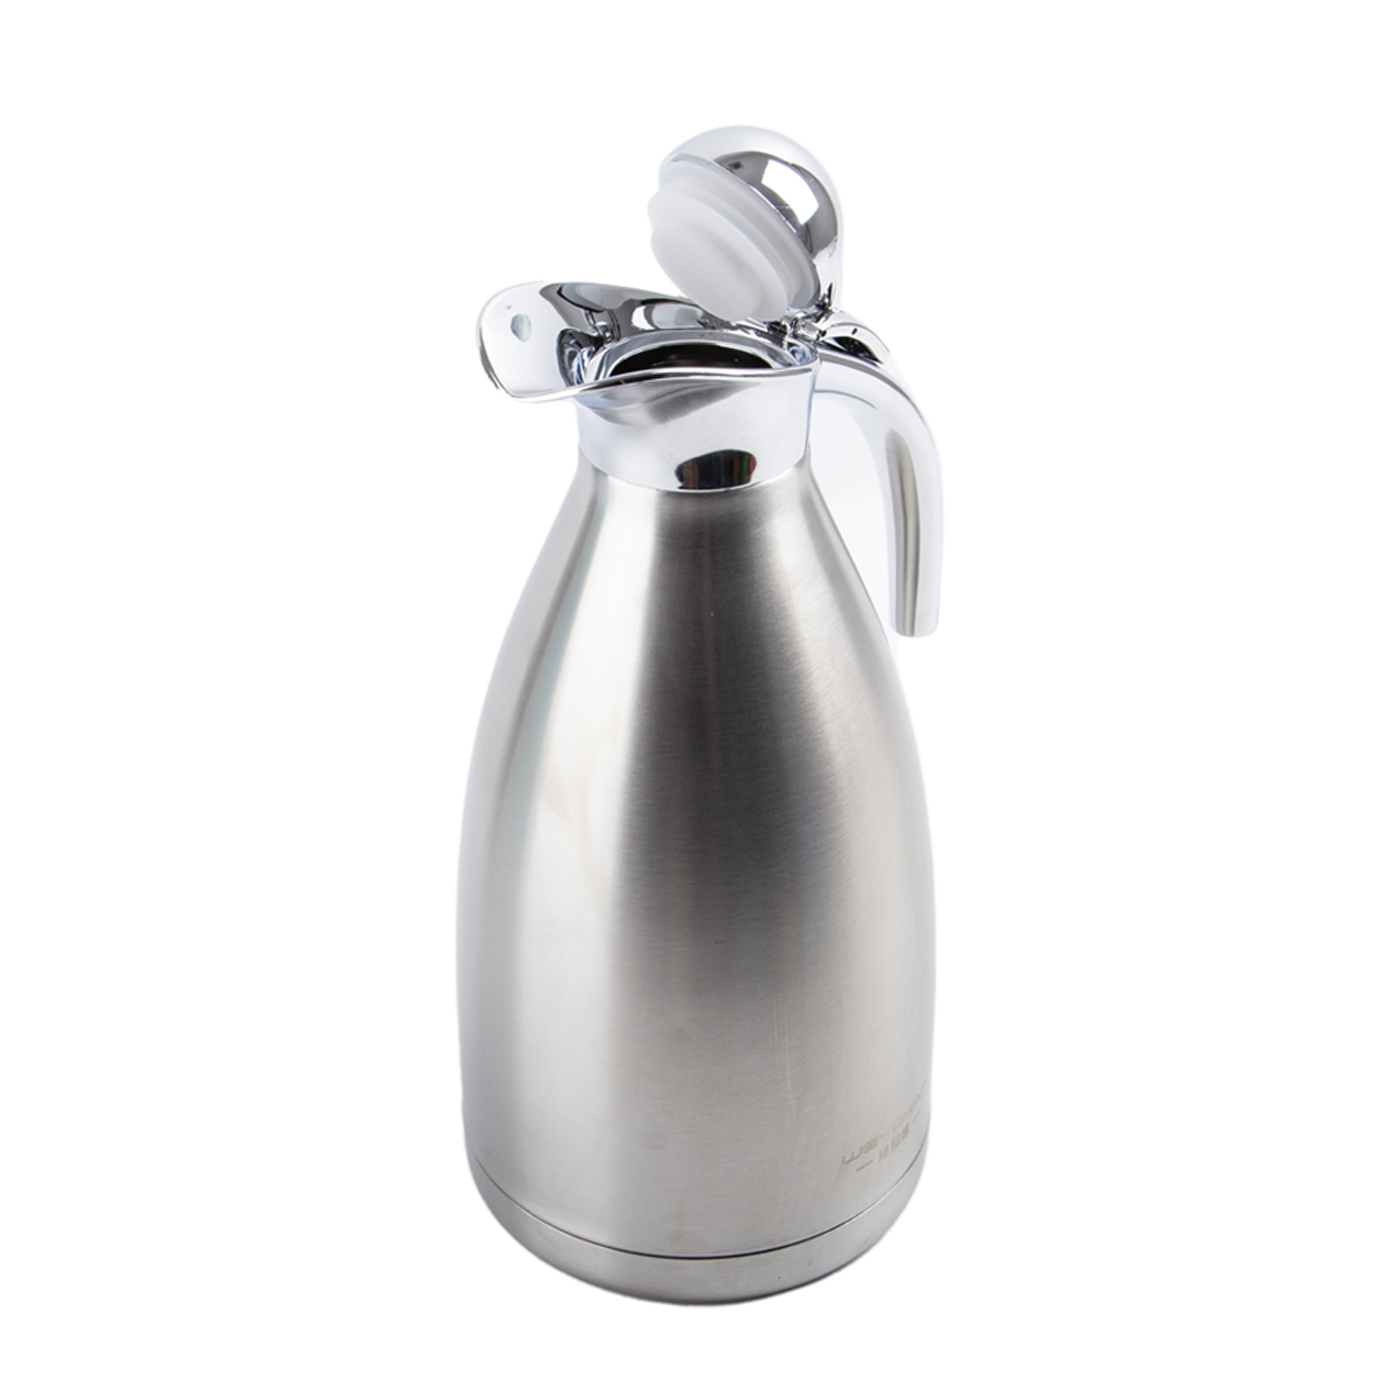 Stainless Steel Thermal Coffee Carafe2